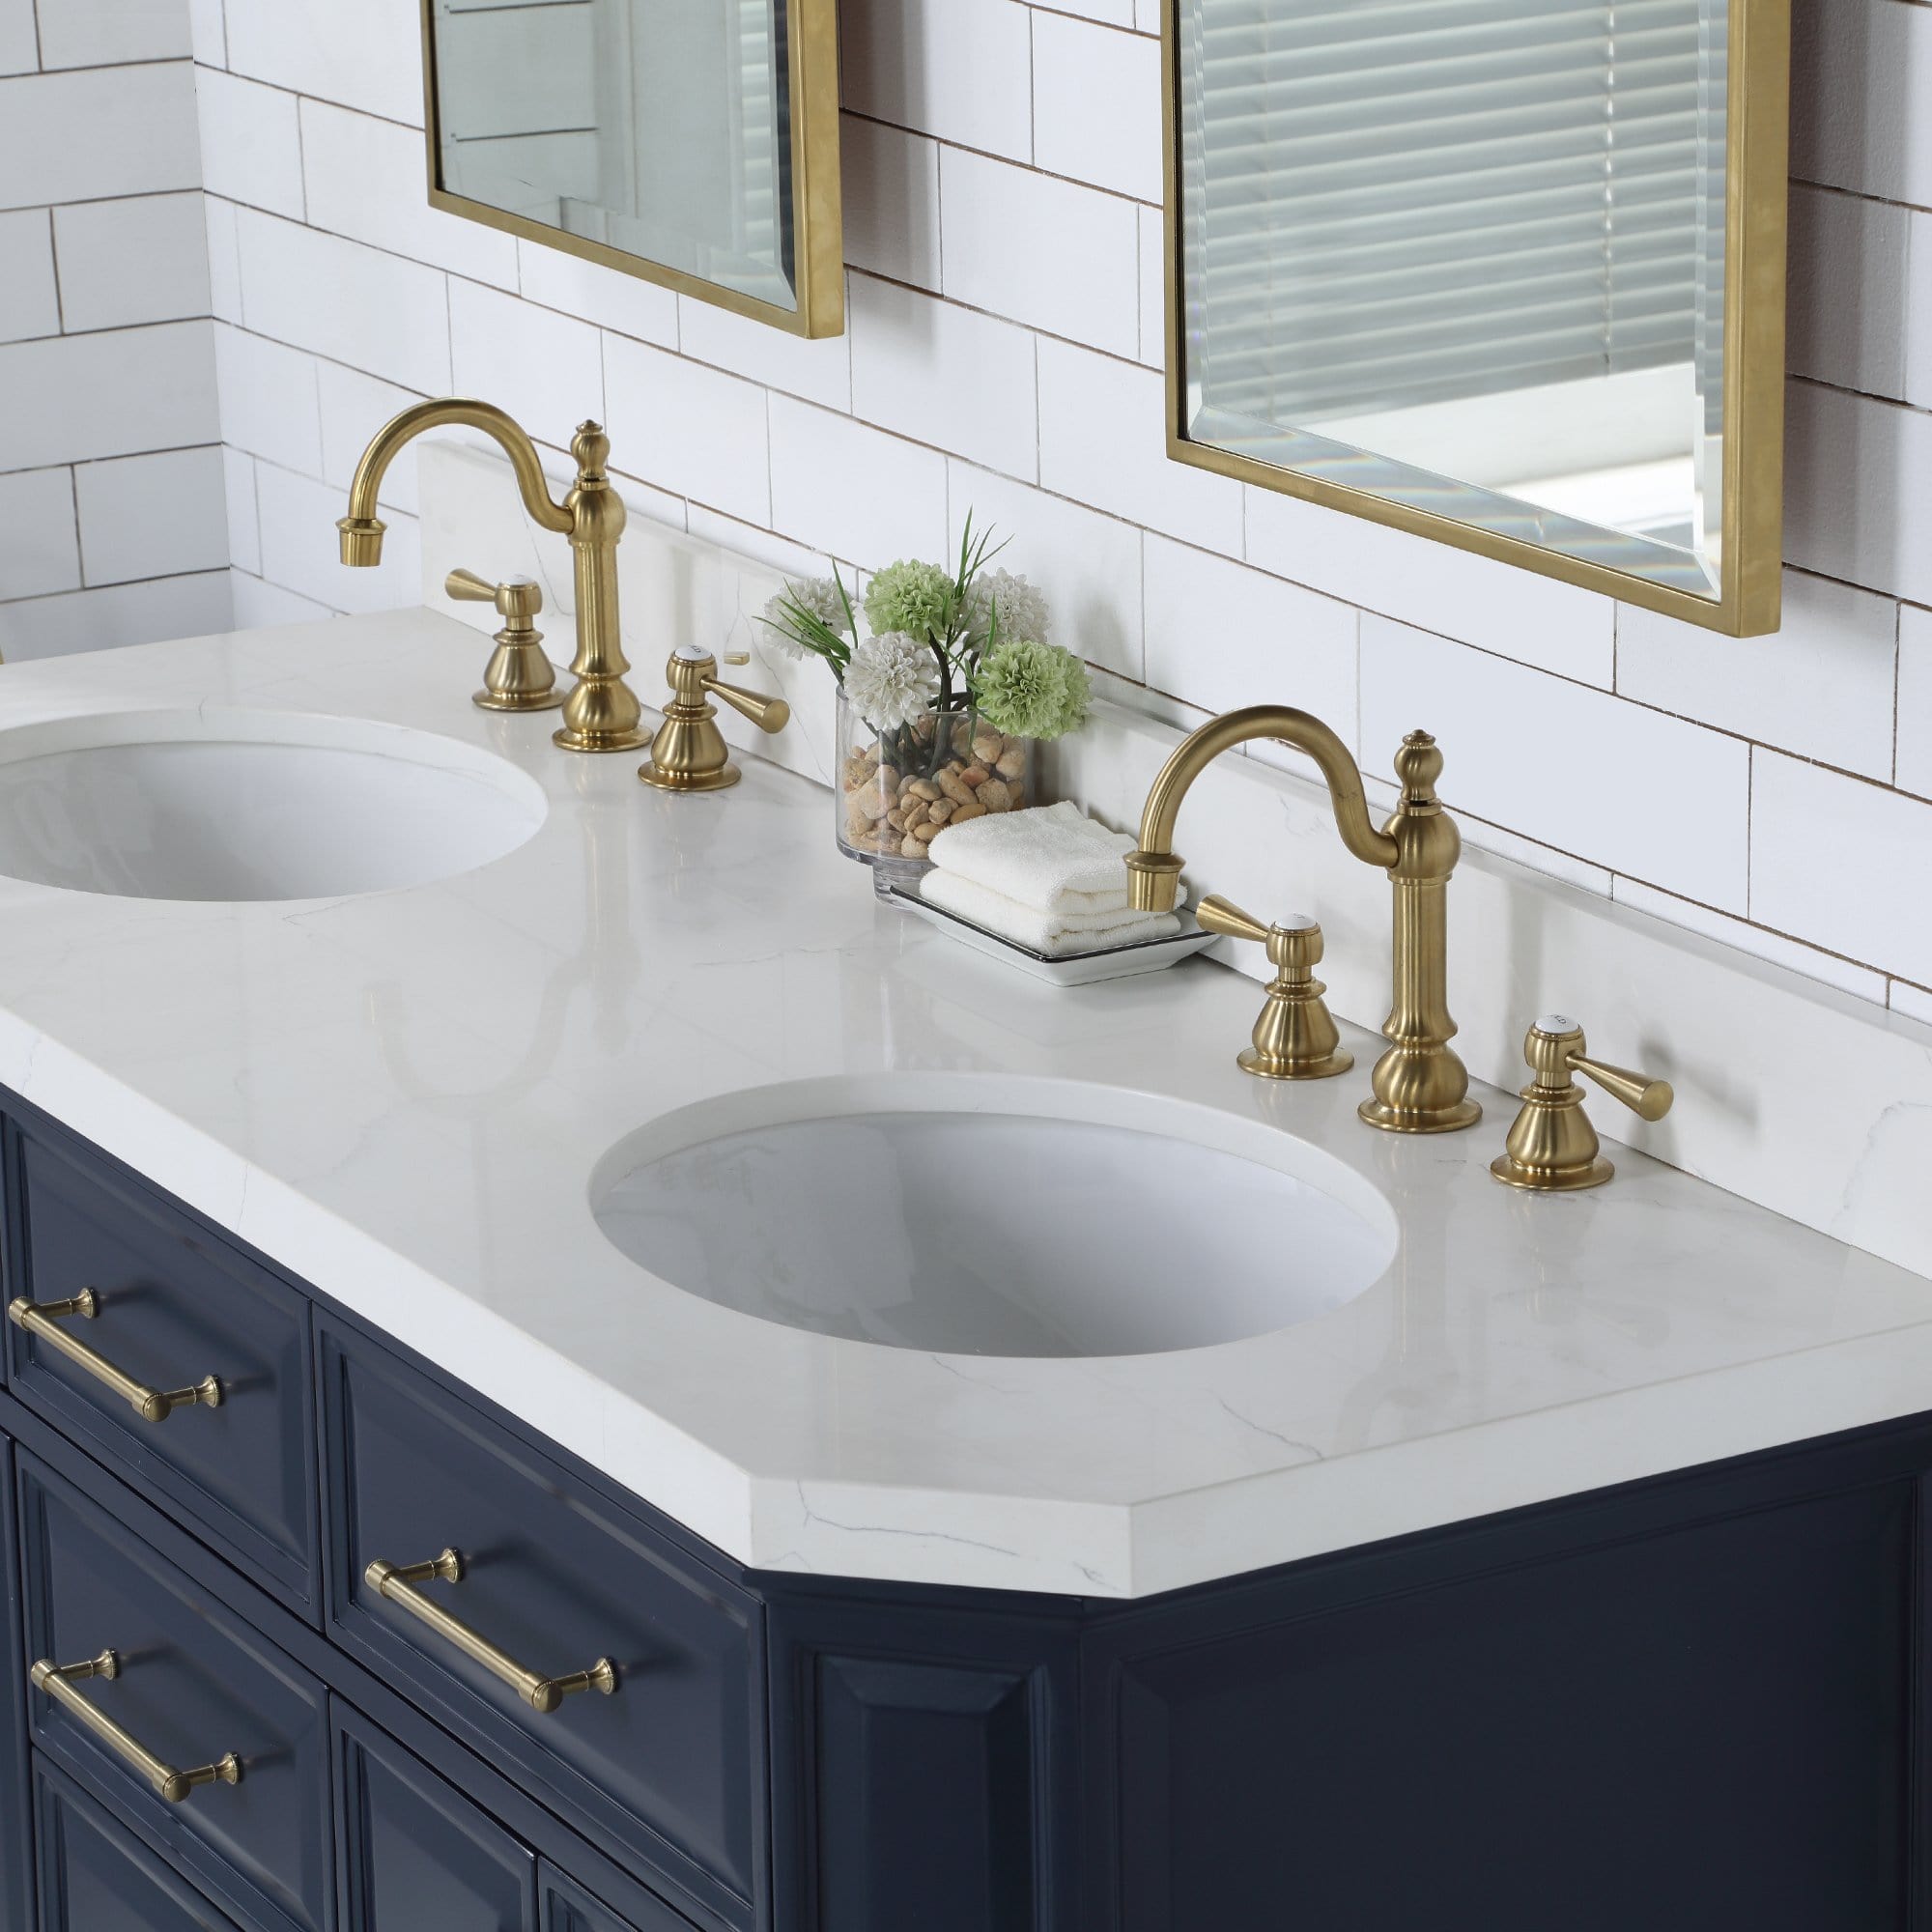 Water Creation Palace 60 In. Double Sink White Quartz Countertop Vanity in Monarch Blue with HookFaucets and Mirrors - Molaix732030765016Bathroom vanityPA60QZ06MB-E18TL1206